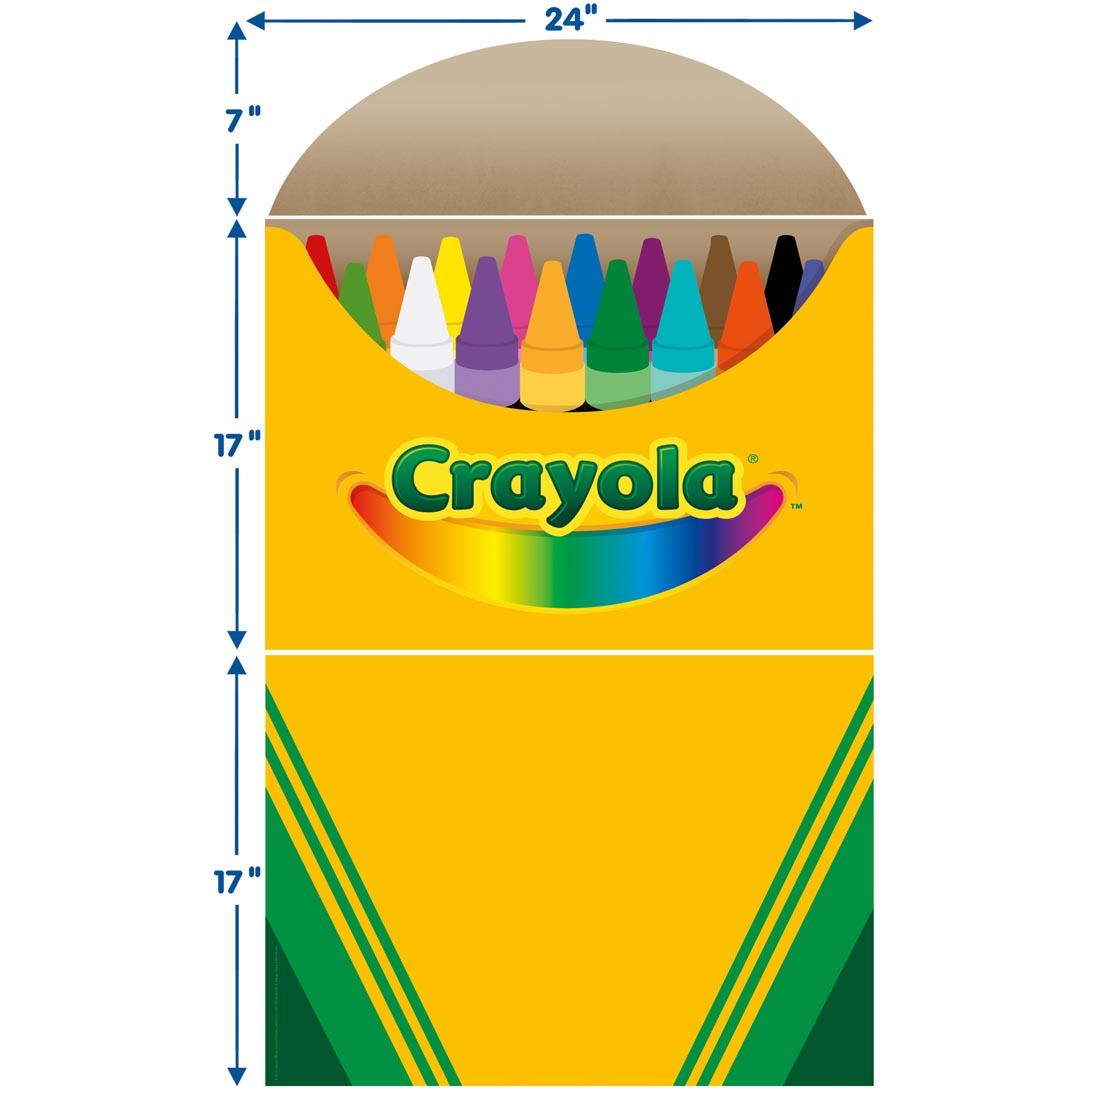 a Crayola crayon box from the Let Your Colors Shine Bulletin Board Set From The Crayola Collection By Eureka labeled with its dimensions